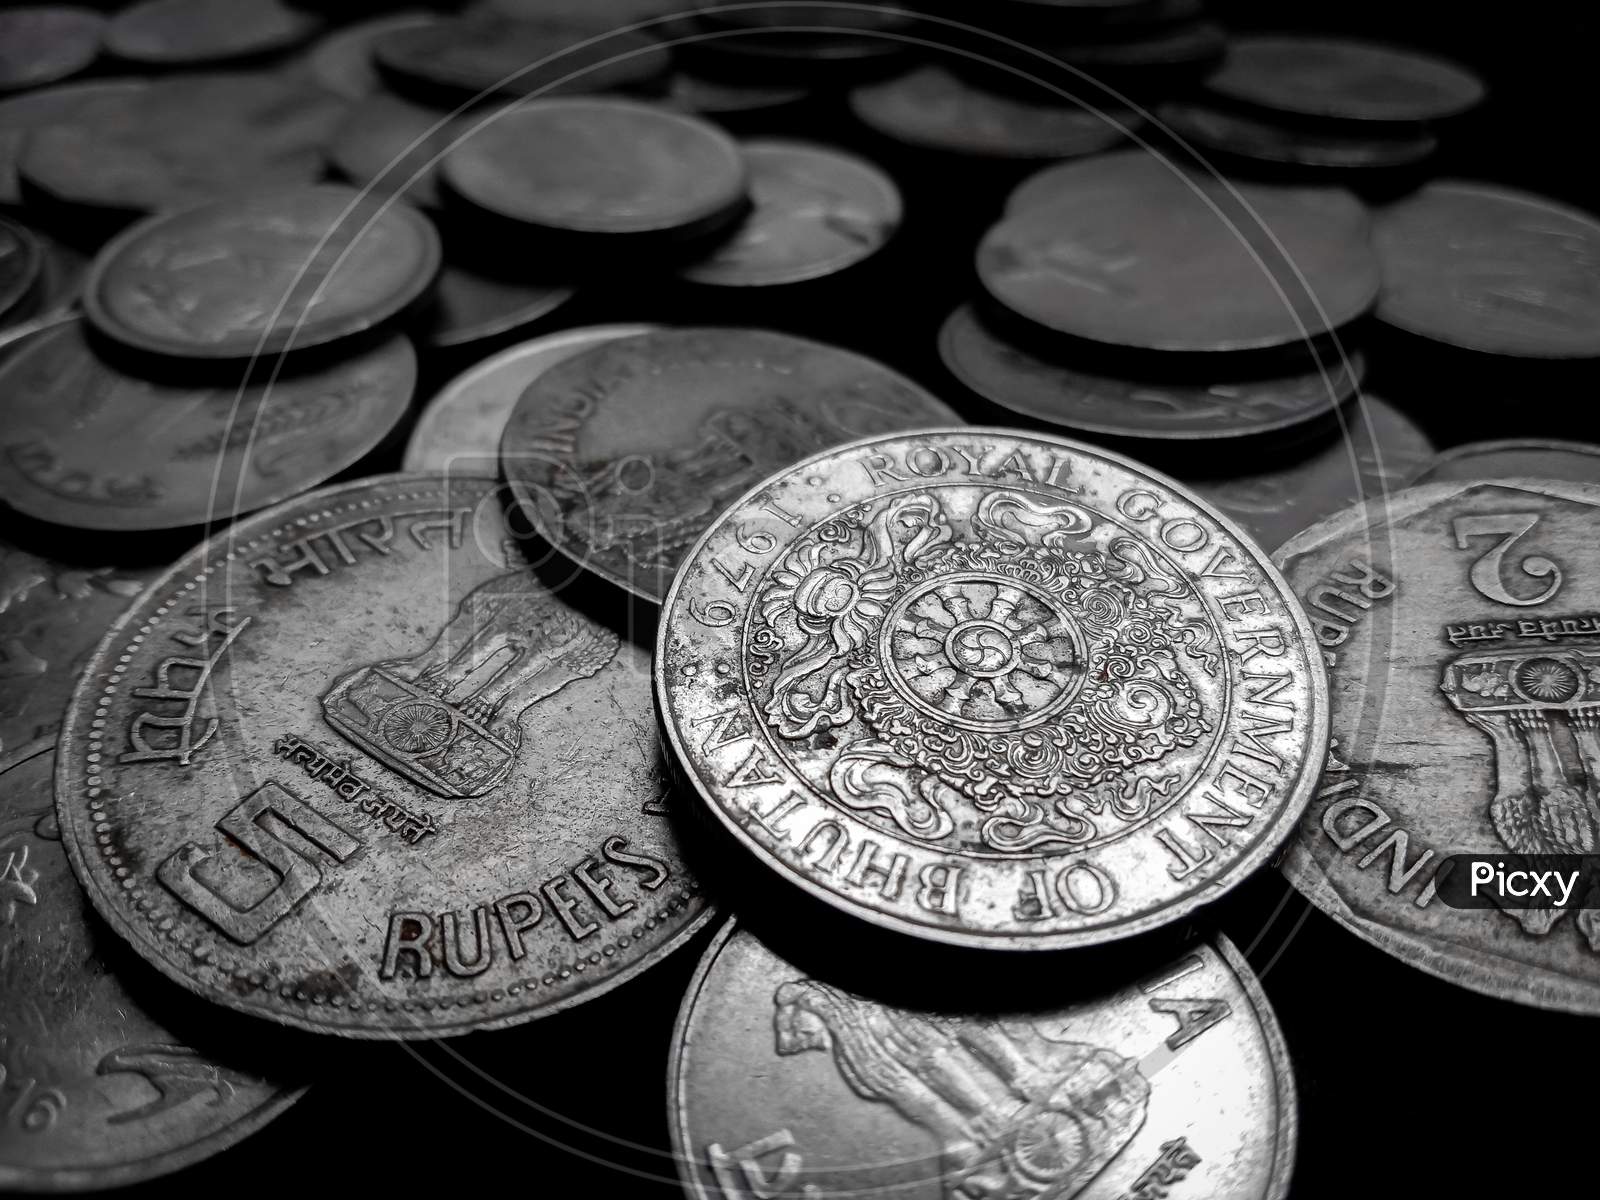 lots of coins image in black background with selective blur